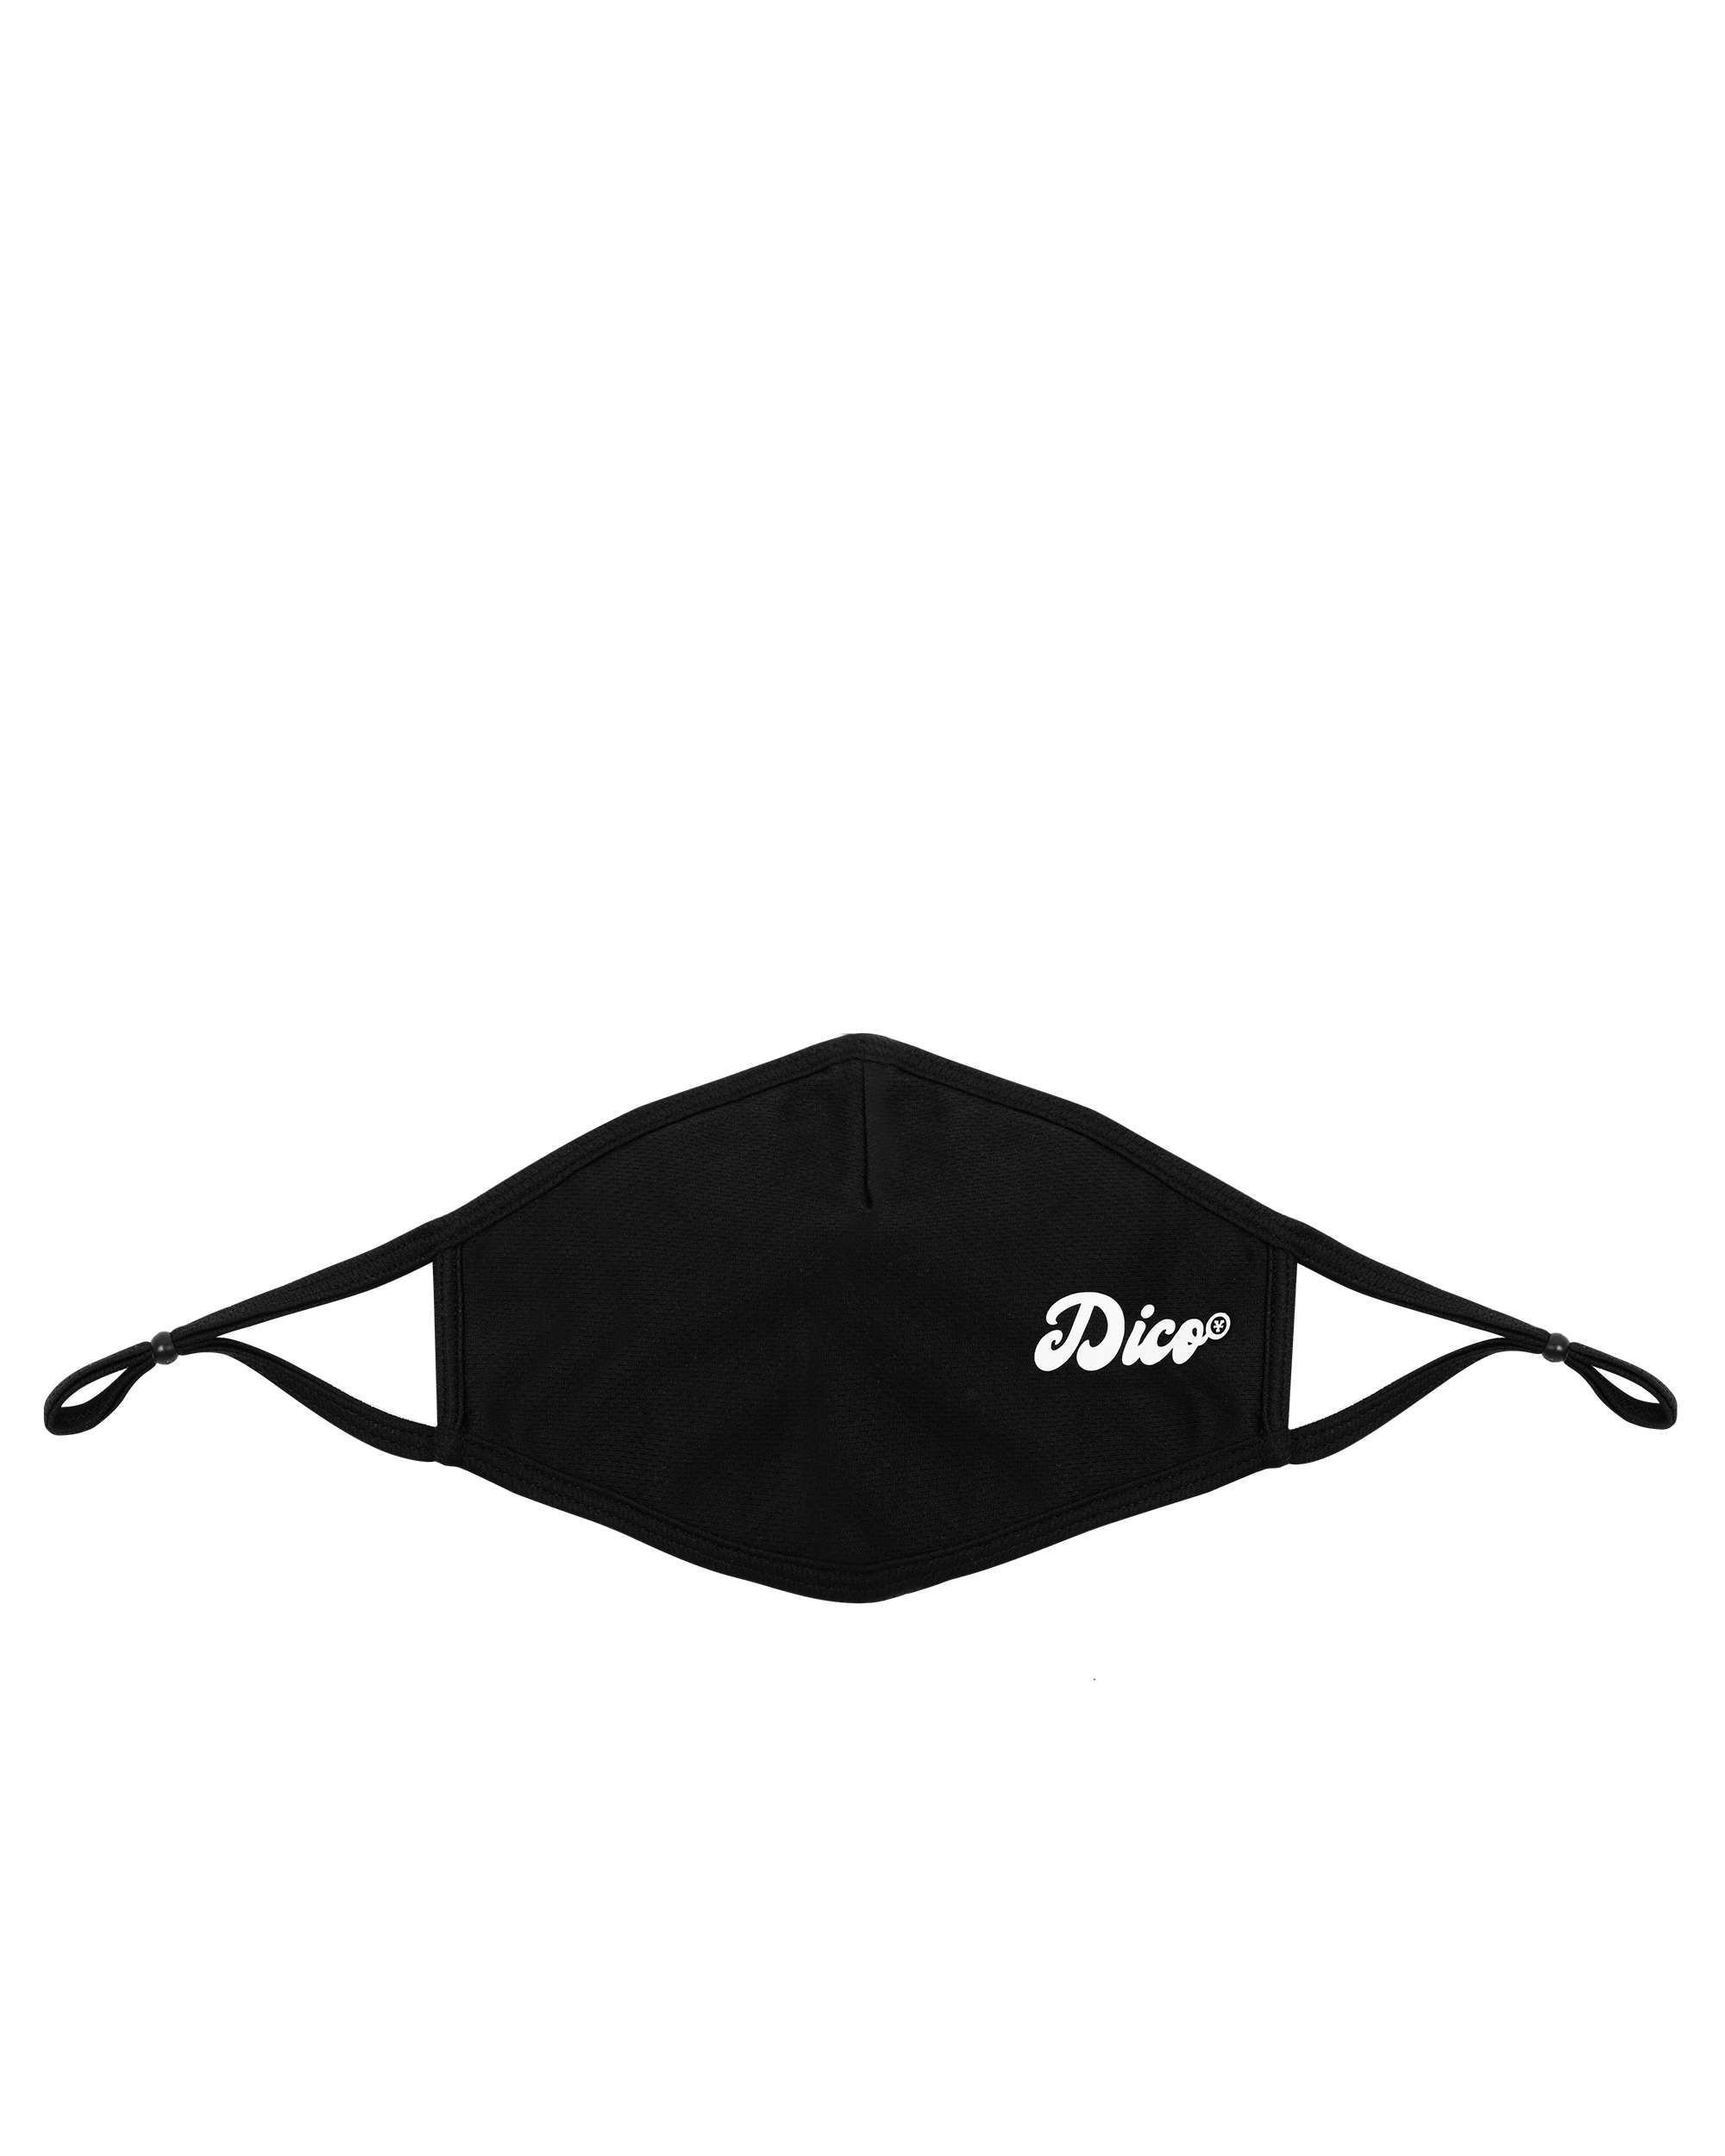 Dico Mask - Set 1 - Pack of 3